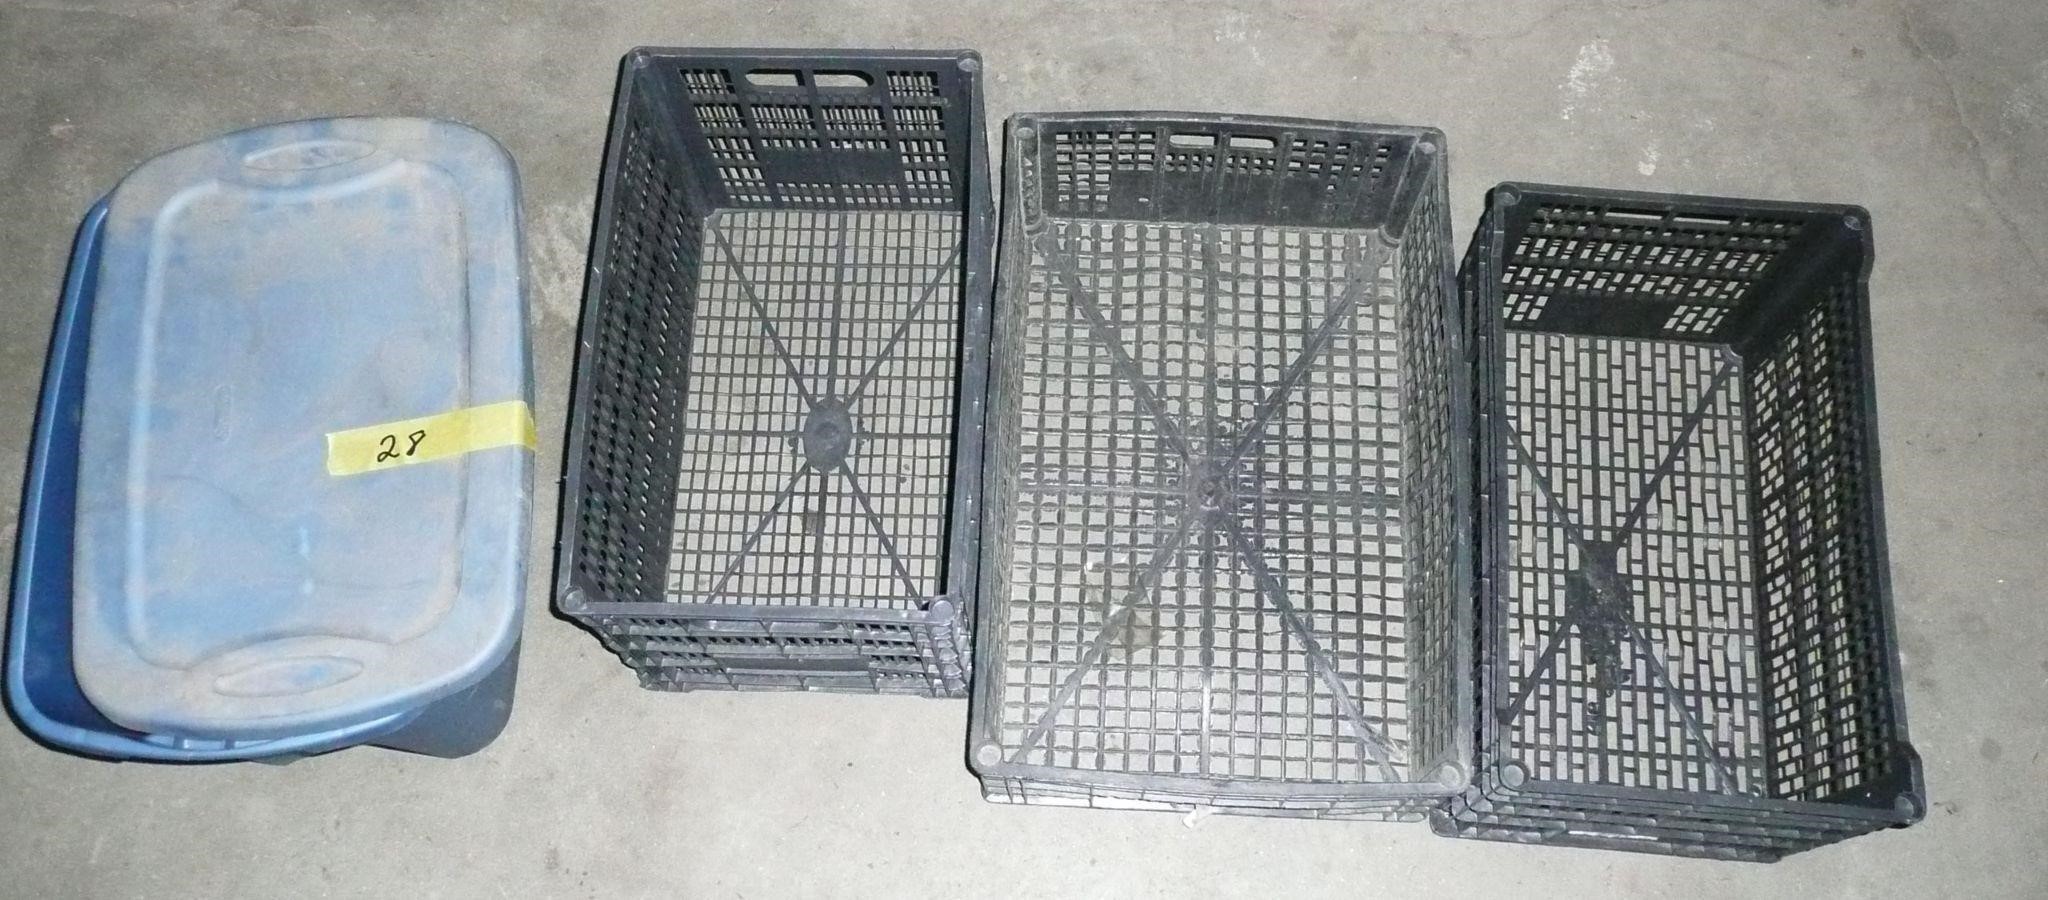 Plastic Totes or baskets